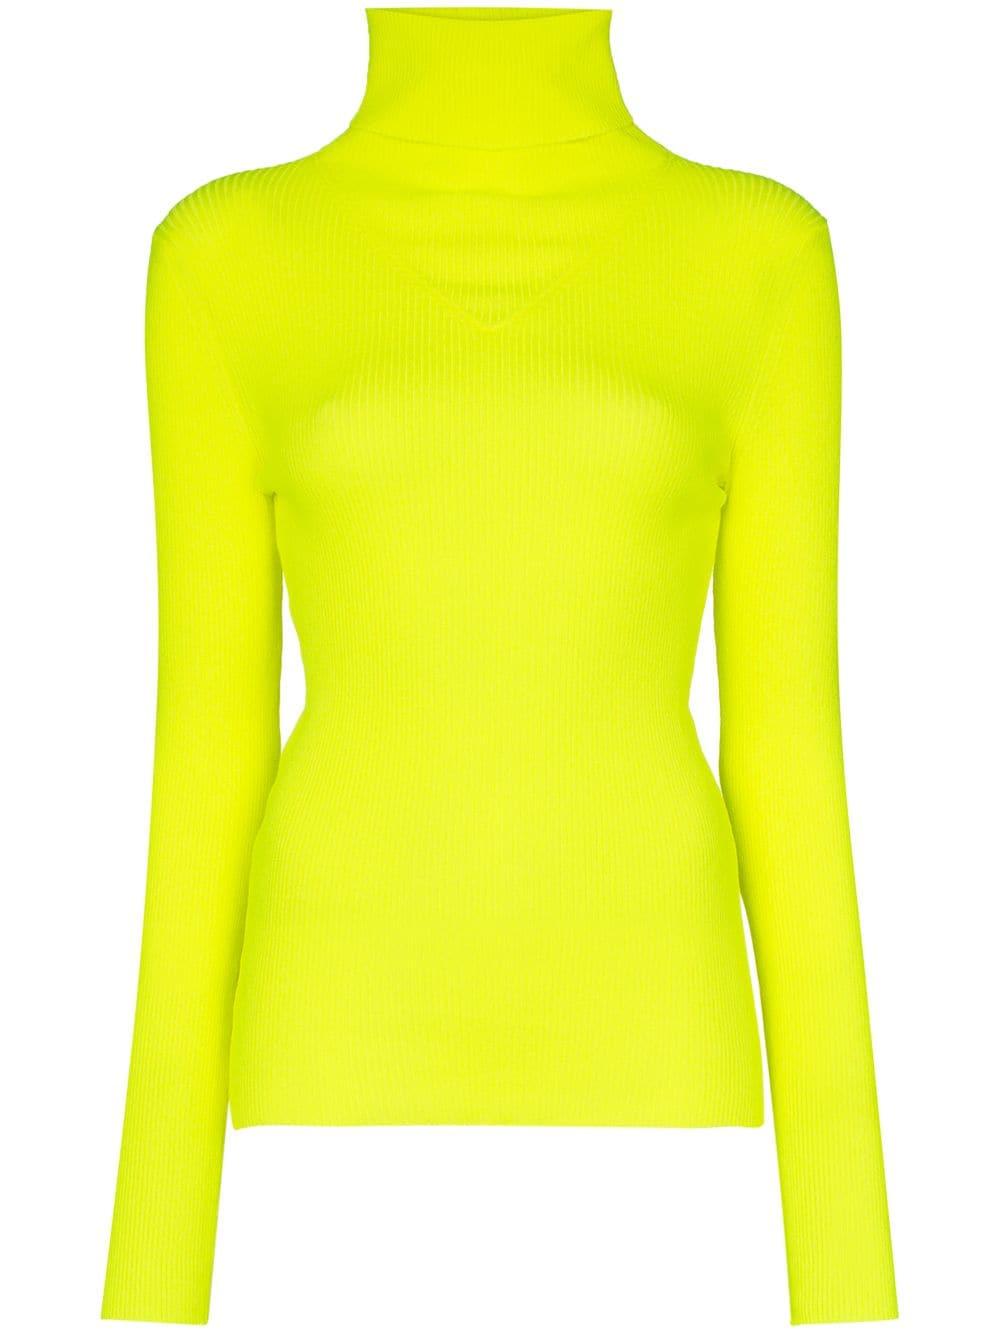 MSGM Ribbed Turtleneck Sweater in Yellow - Lyst